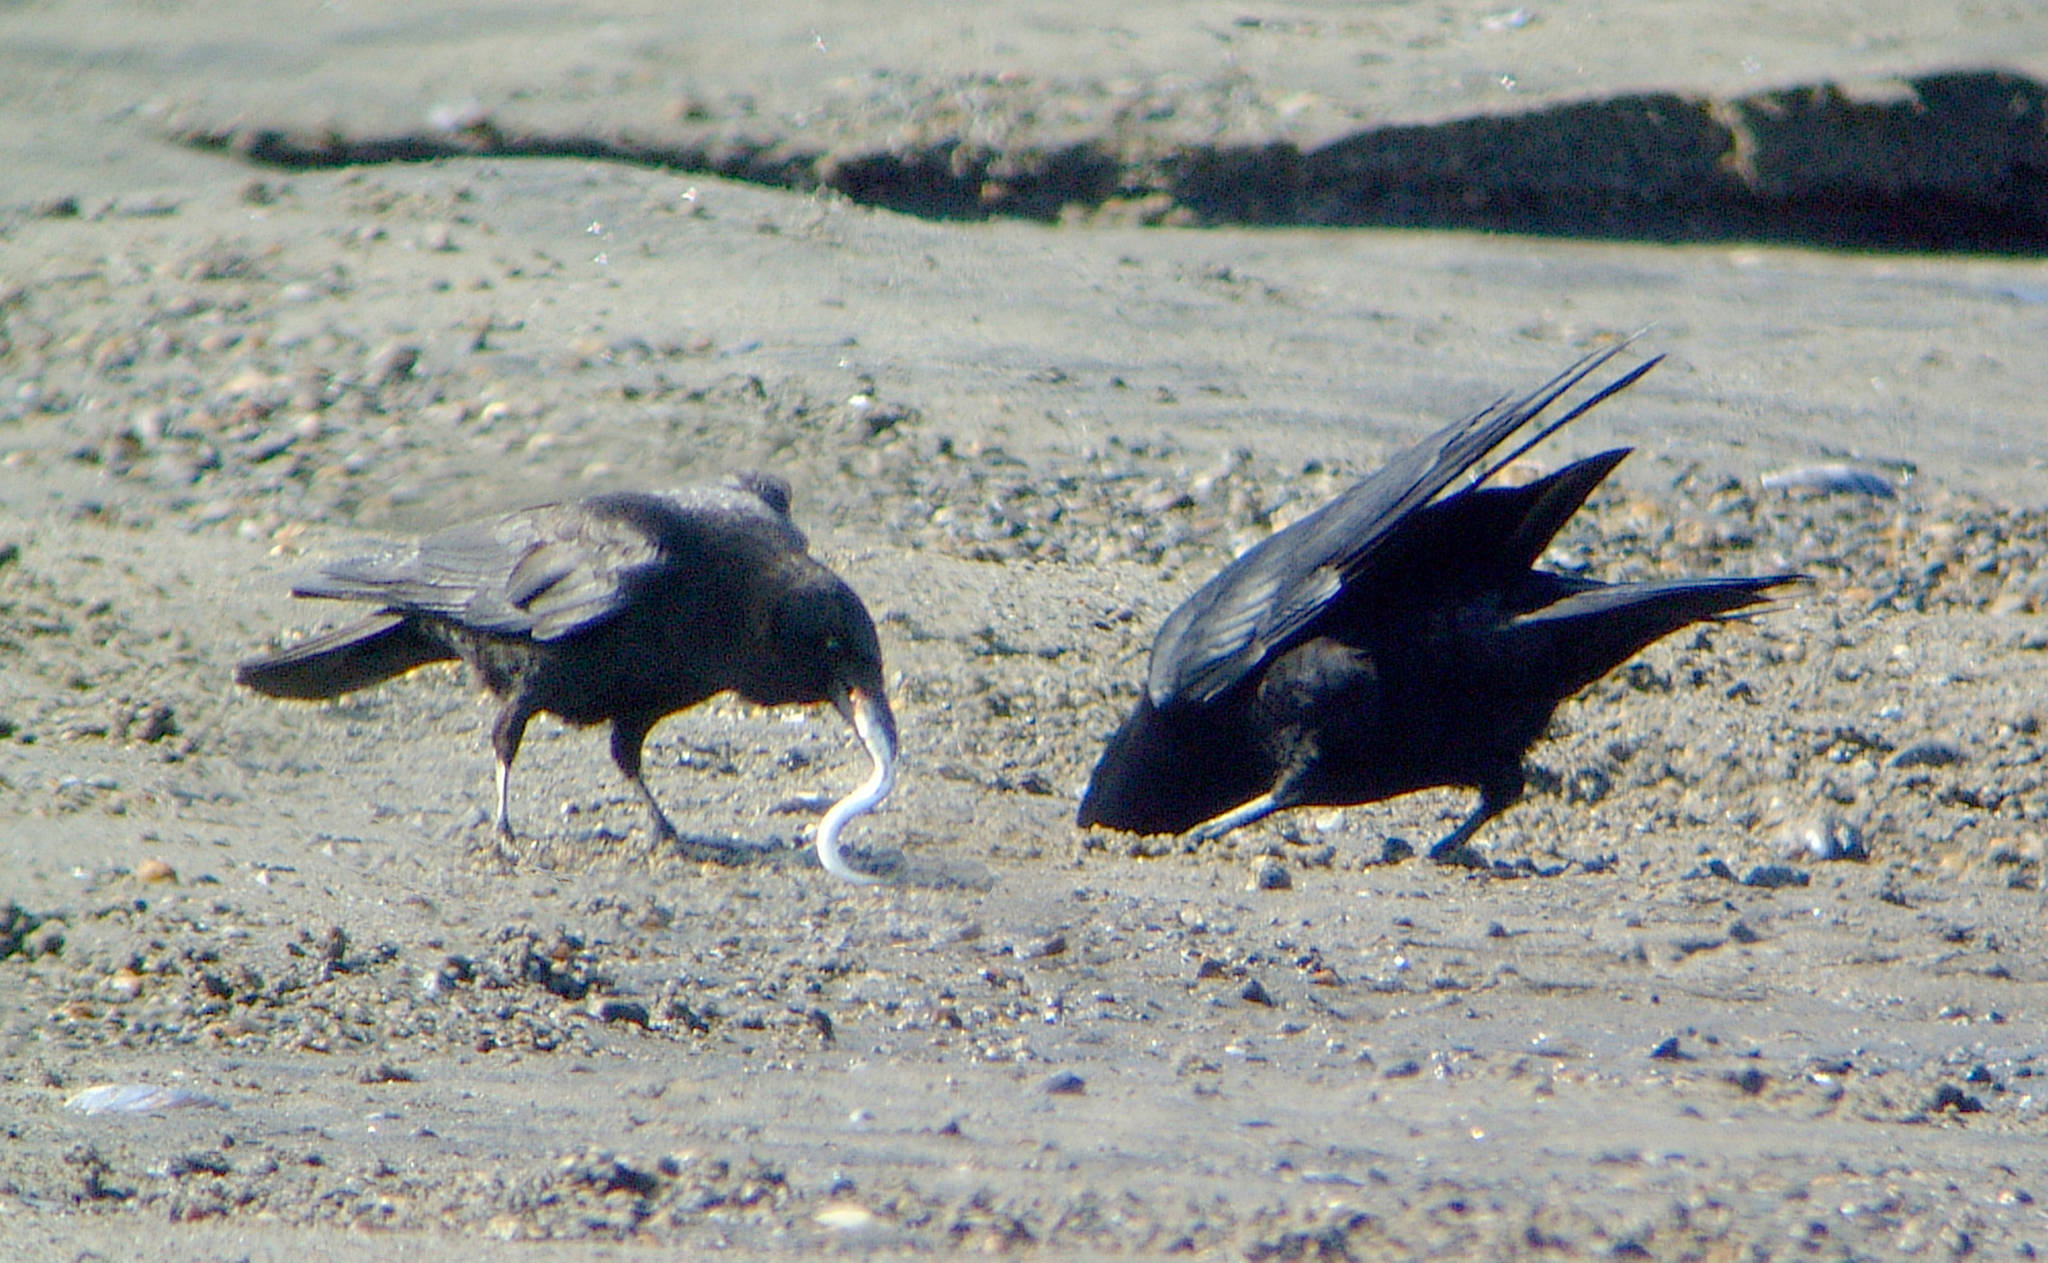 Northwestern crows dig up sand lance from the tide flats. (Photo by Bob Armstrong)